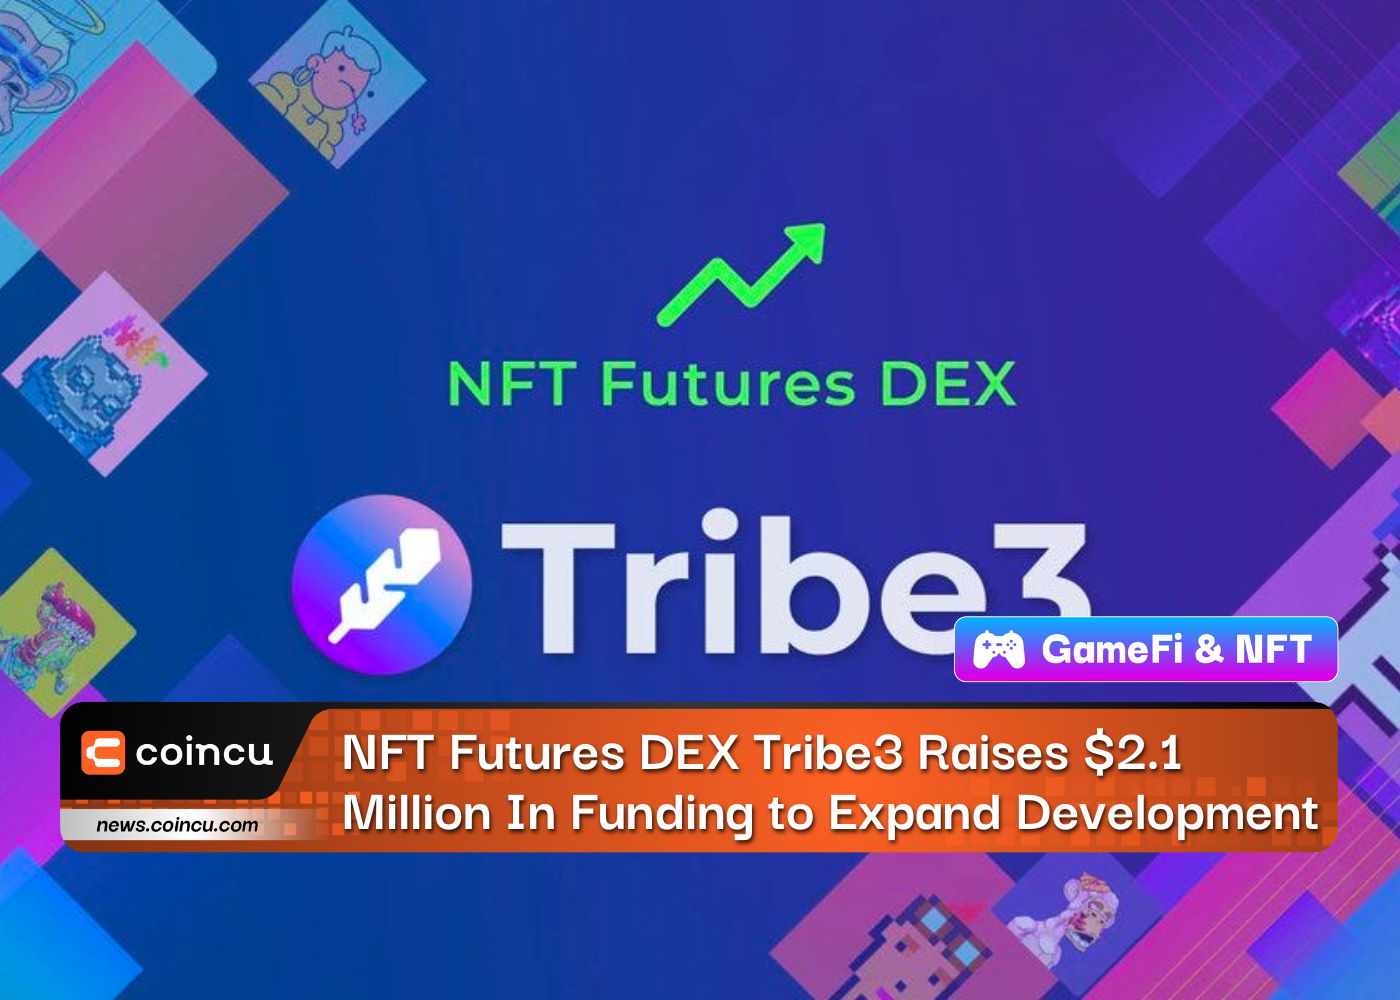 NFT Futures DEX Tribe3 Raises $2.1 Million In Funding to Expand Development